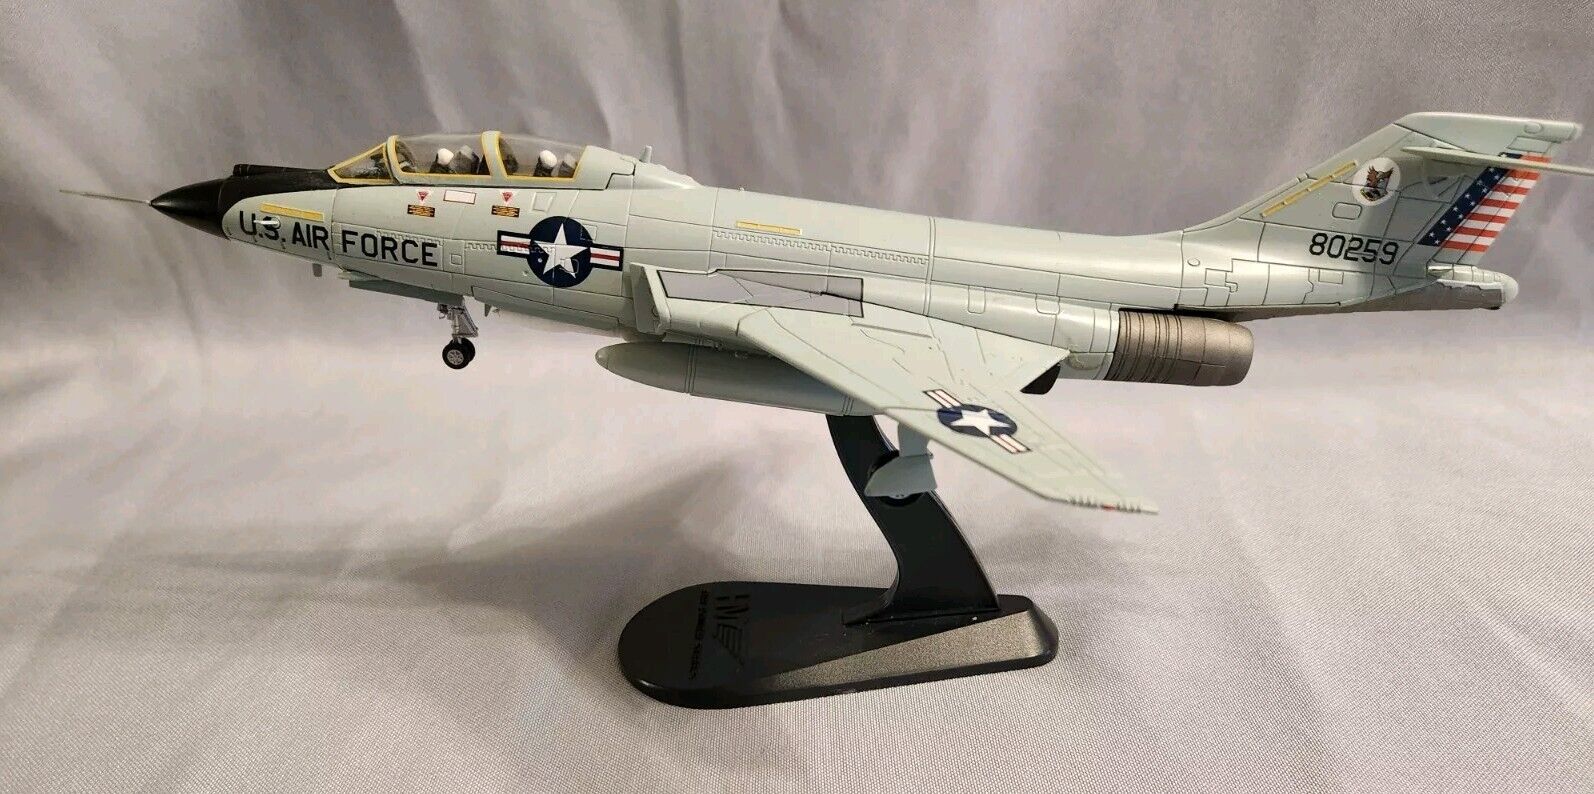 Hobby Master 1:72 Scale HA3701 McDonnell F-101B Voodoo Fighter Jet USAF